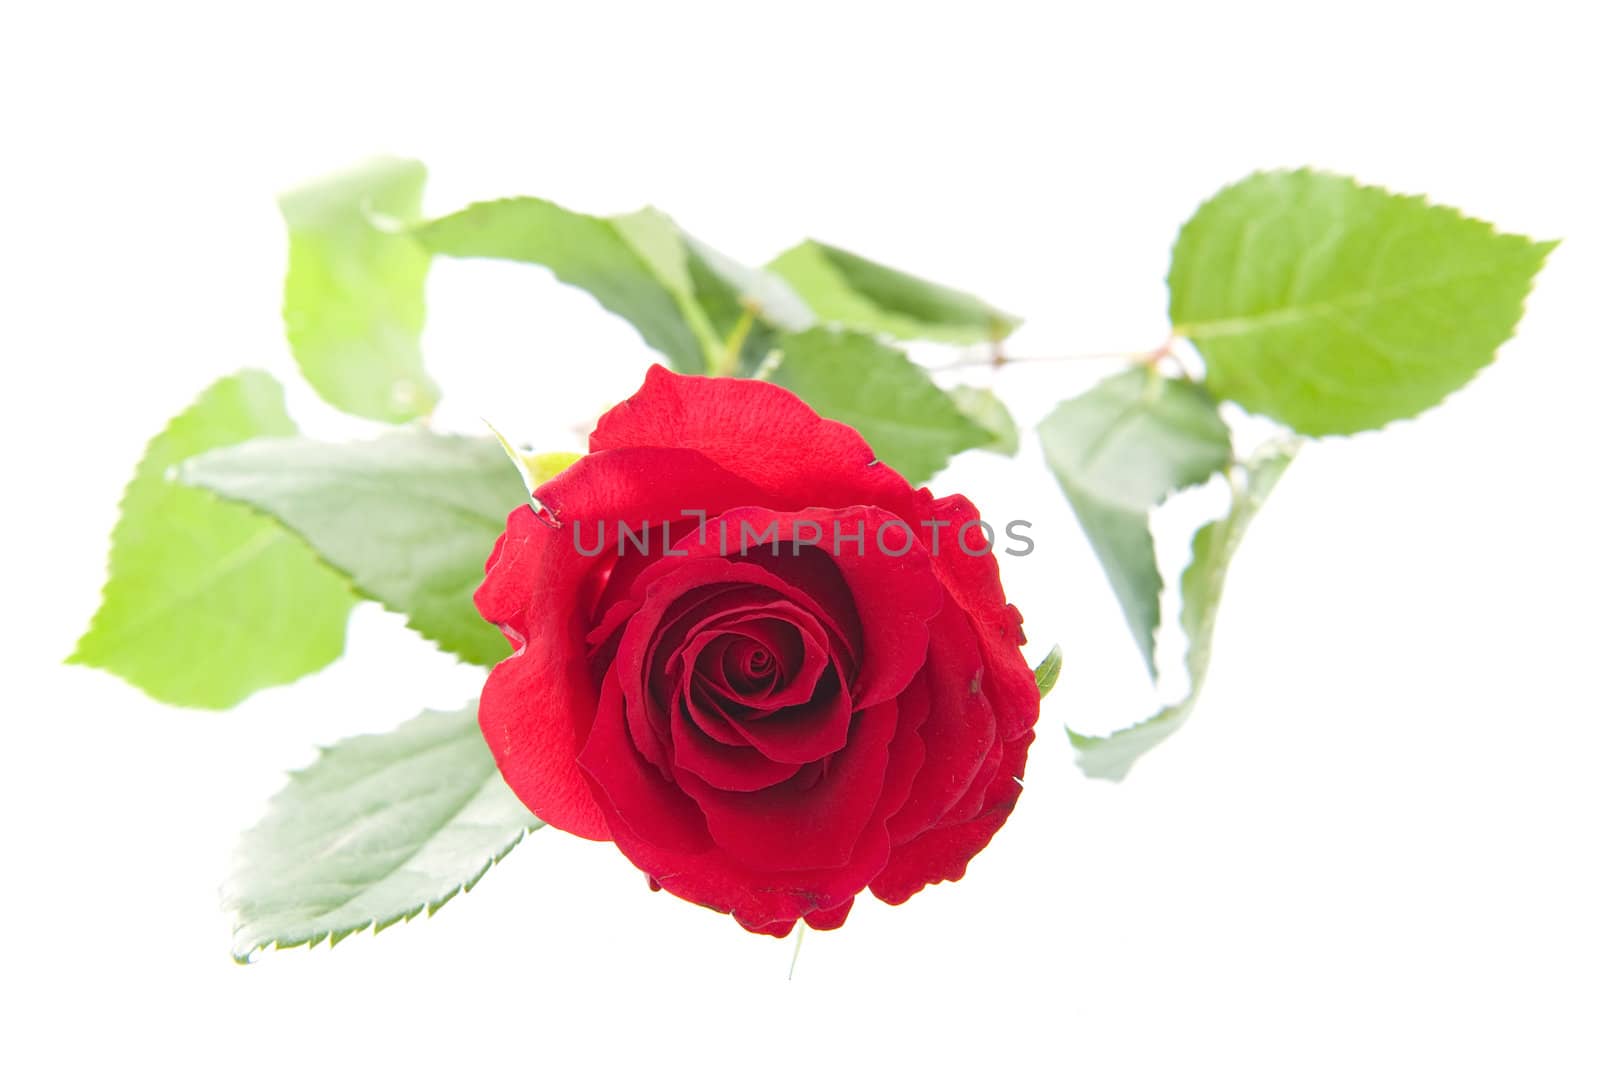 A beautiful red rose on a white background